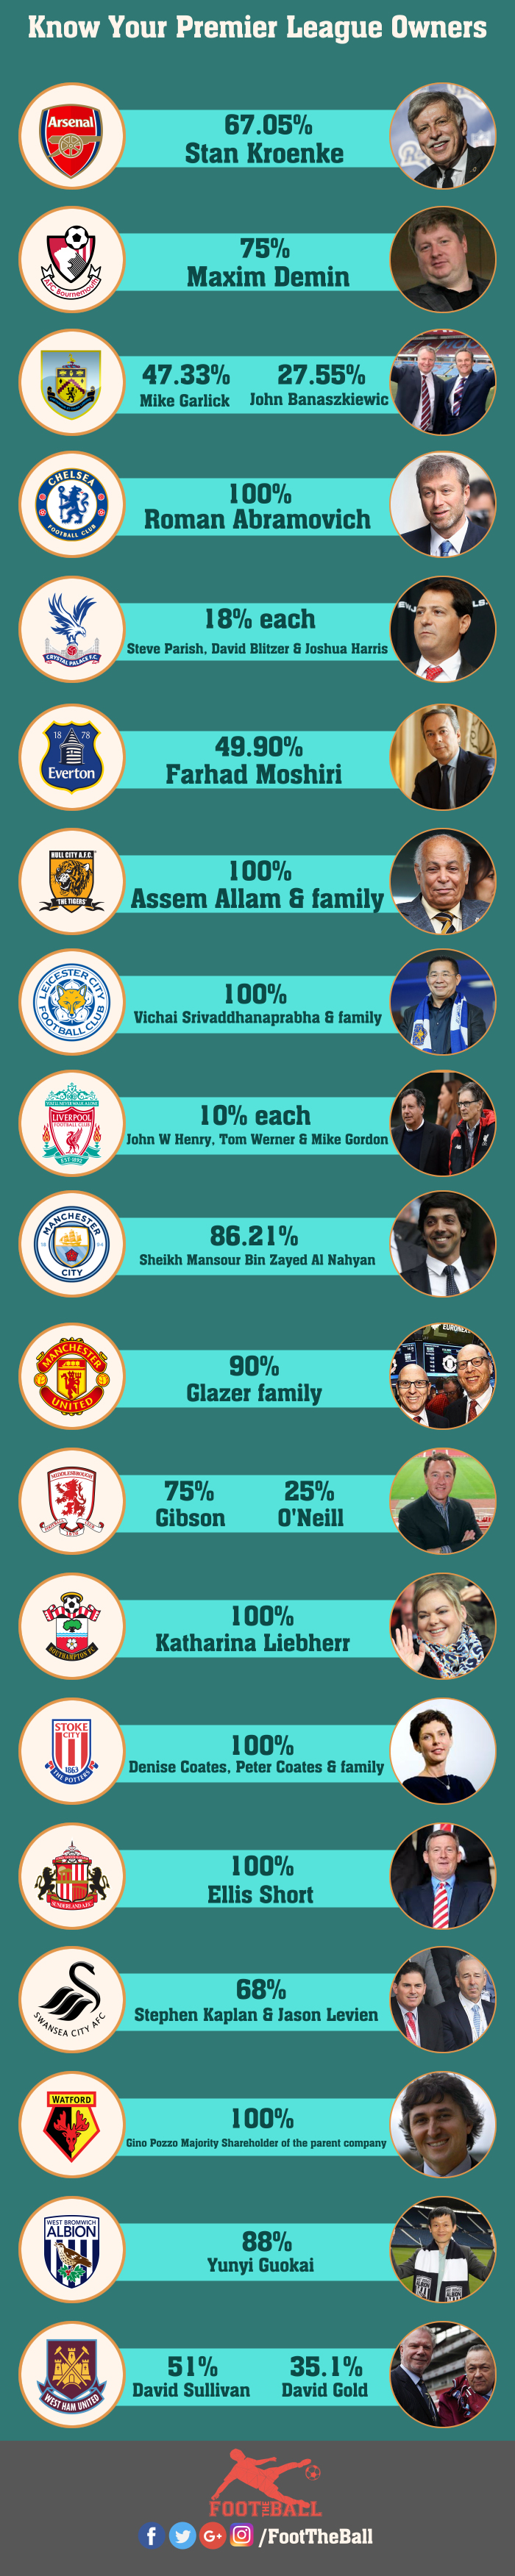 The Super-Rich Premier League Owners Club : Those Who Made The